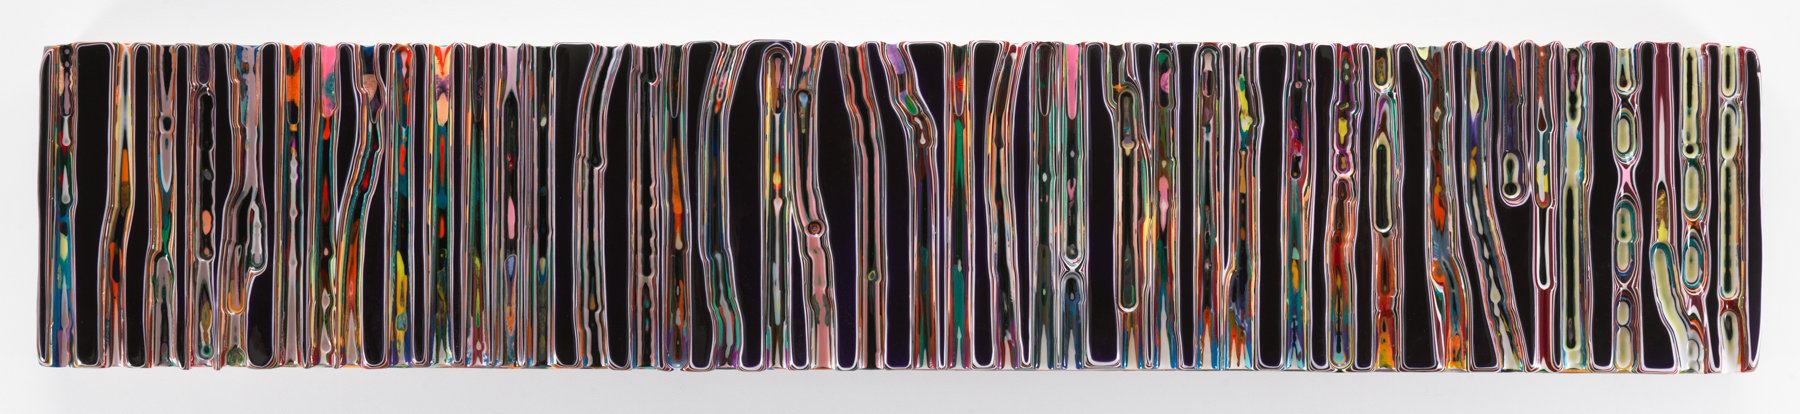 ROCKSINMYBED, 2016, Epoxy resin and pigments on wood, 18 x 96 inches, 45.7 x 243.8 cm, AMY#28367